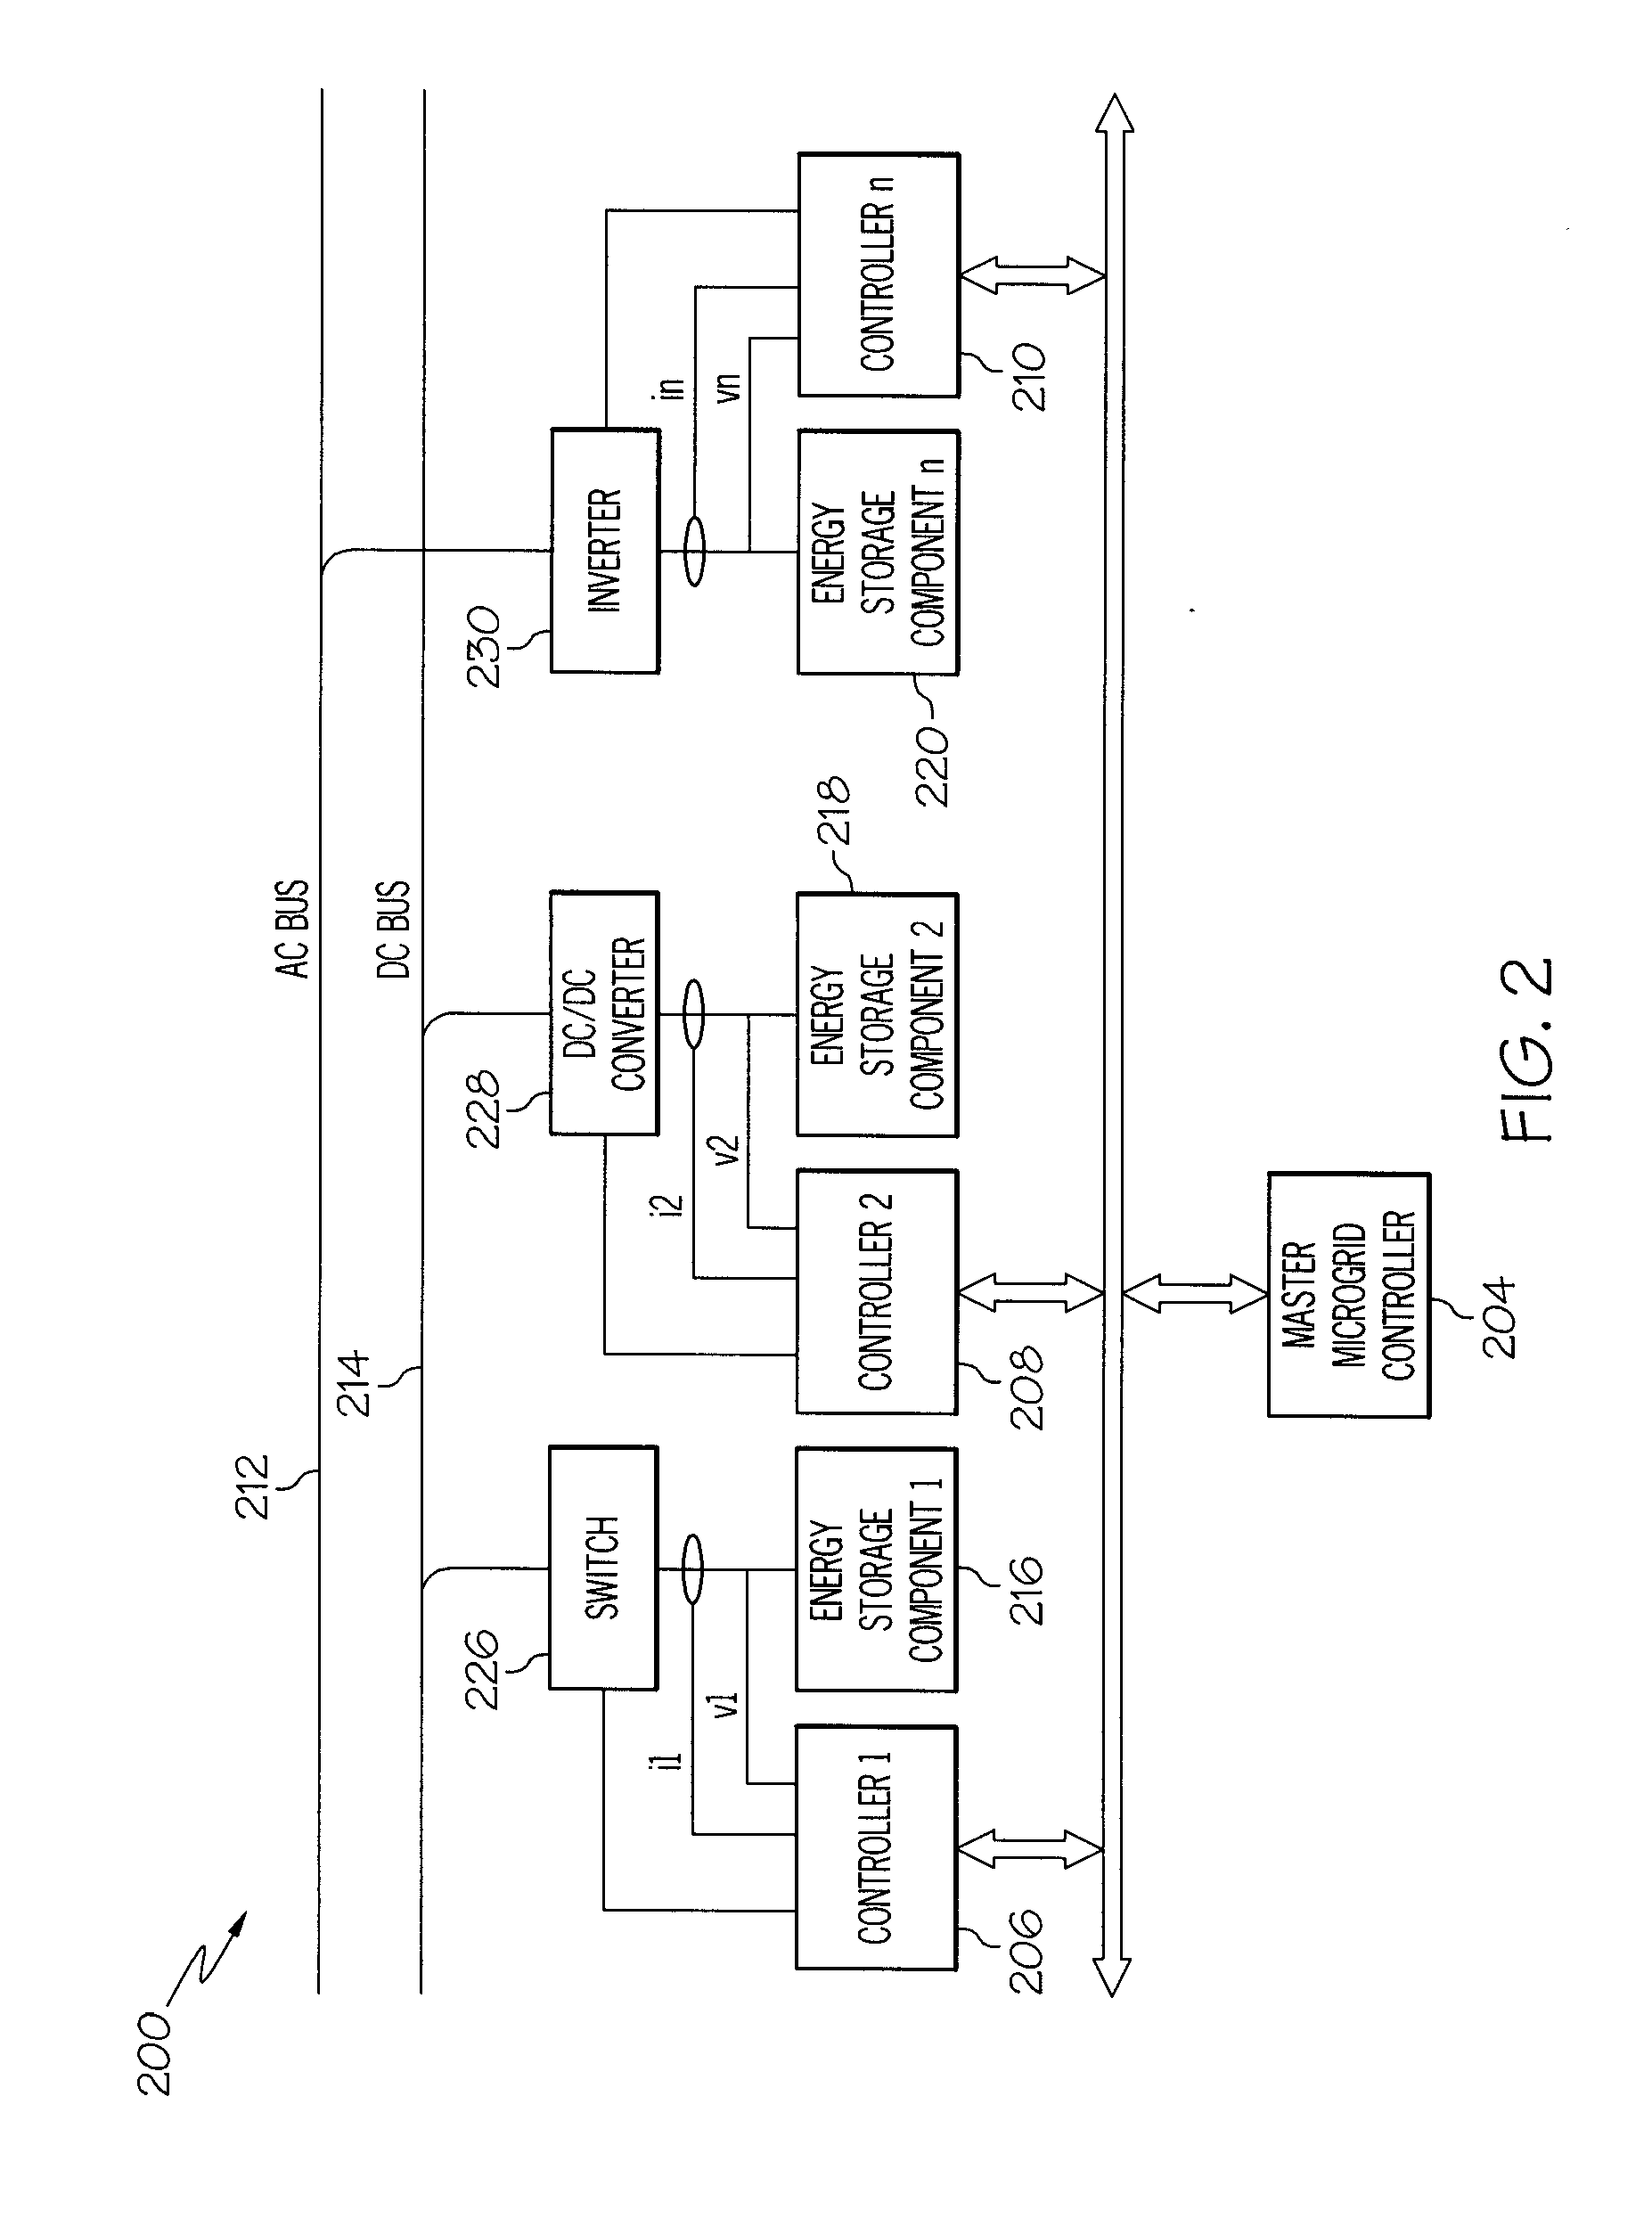 Method and apparatus for effective utilization of energy storage components within a microgrid